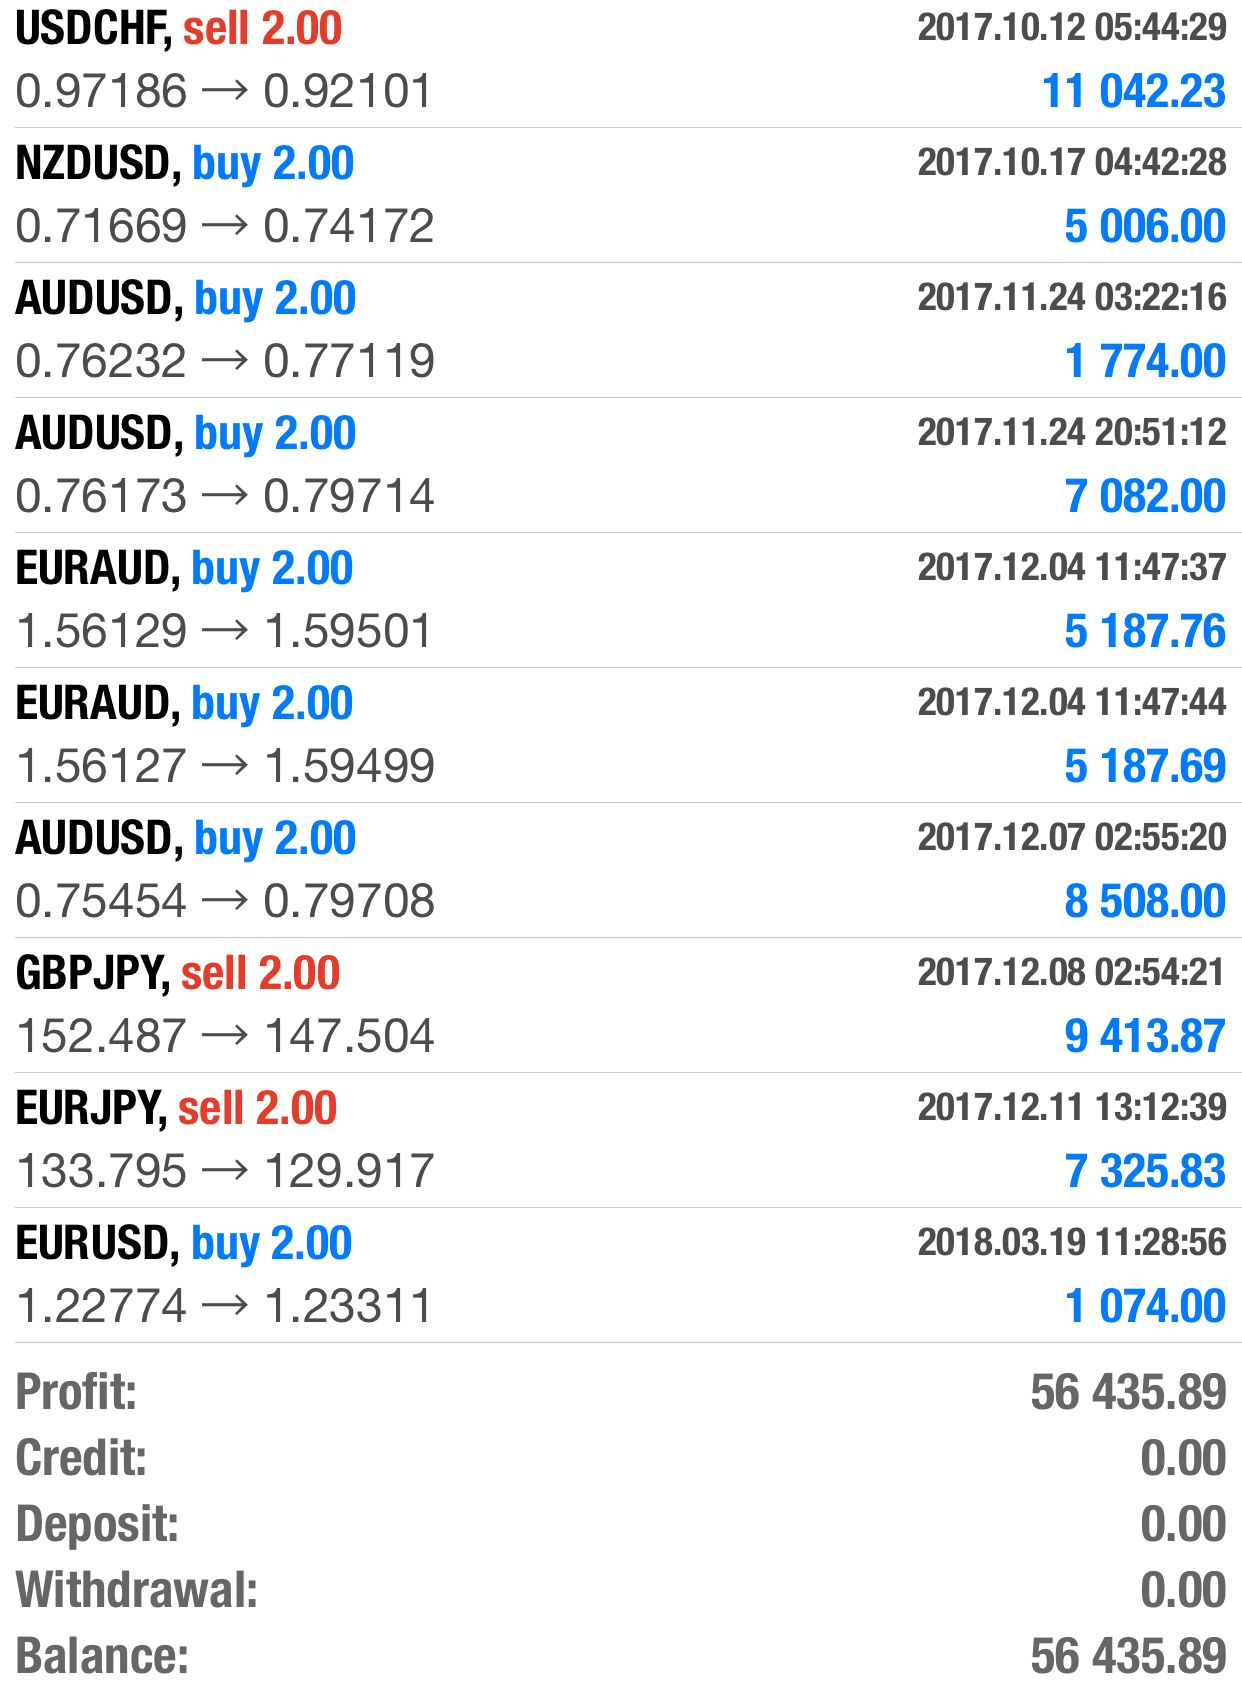 How to be profitable in forex